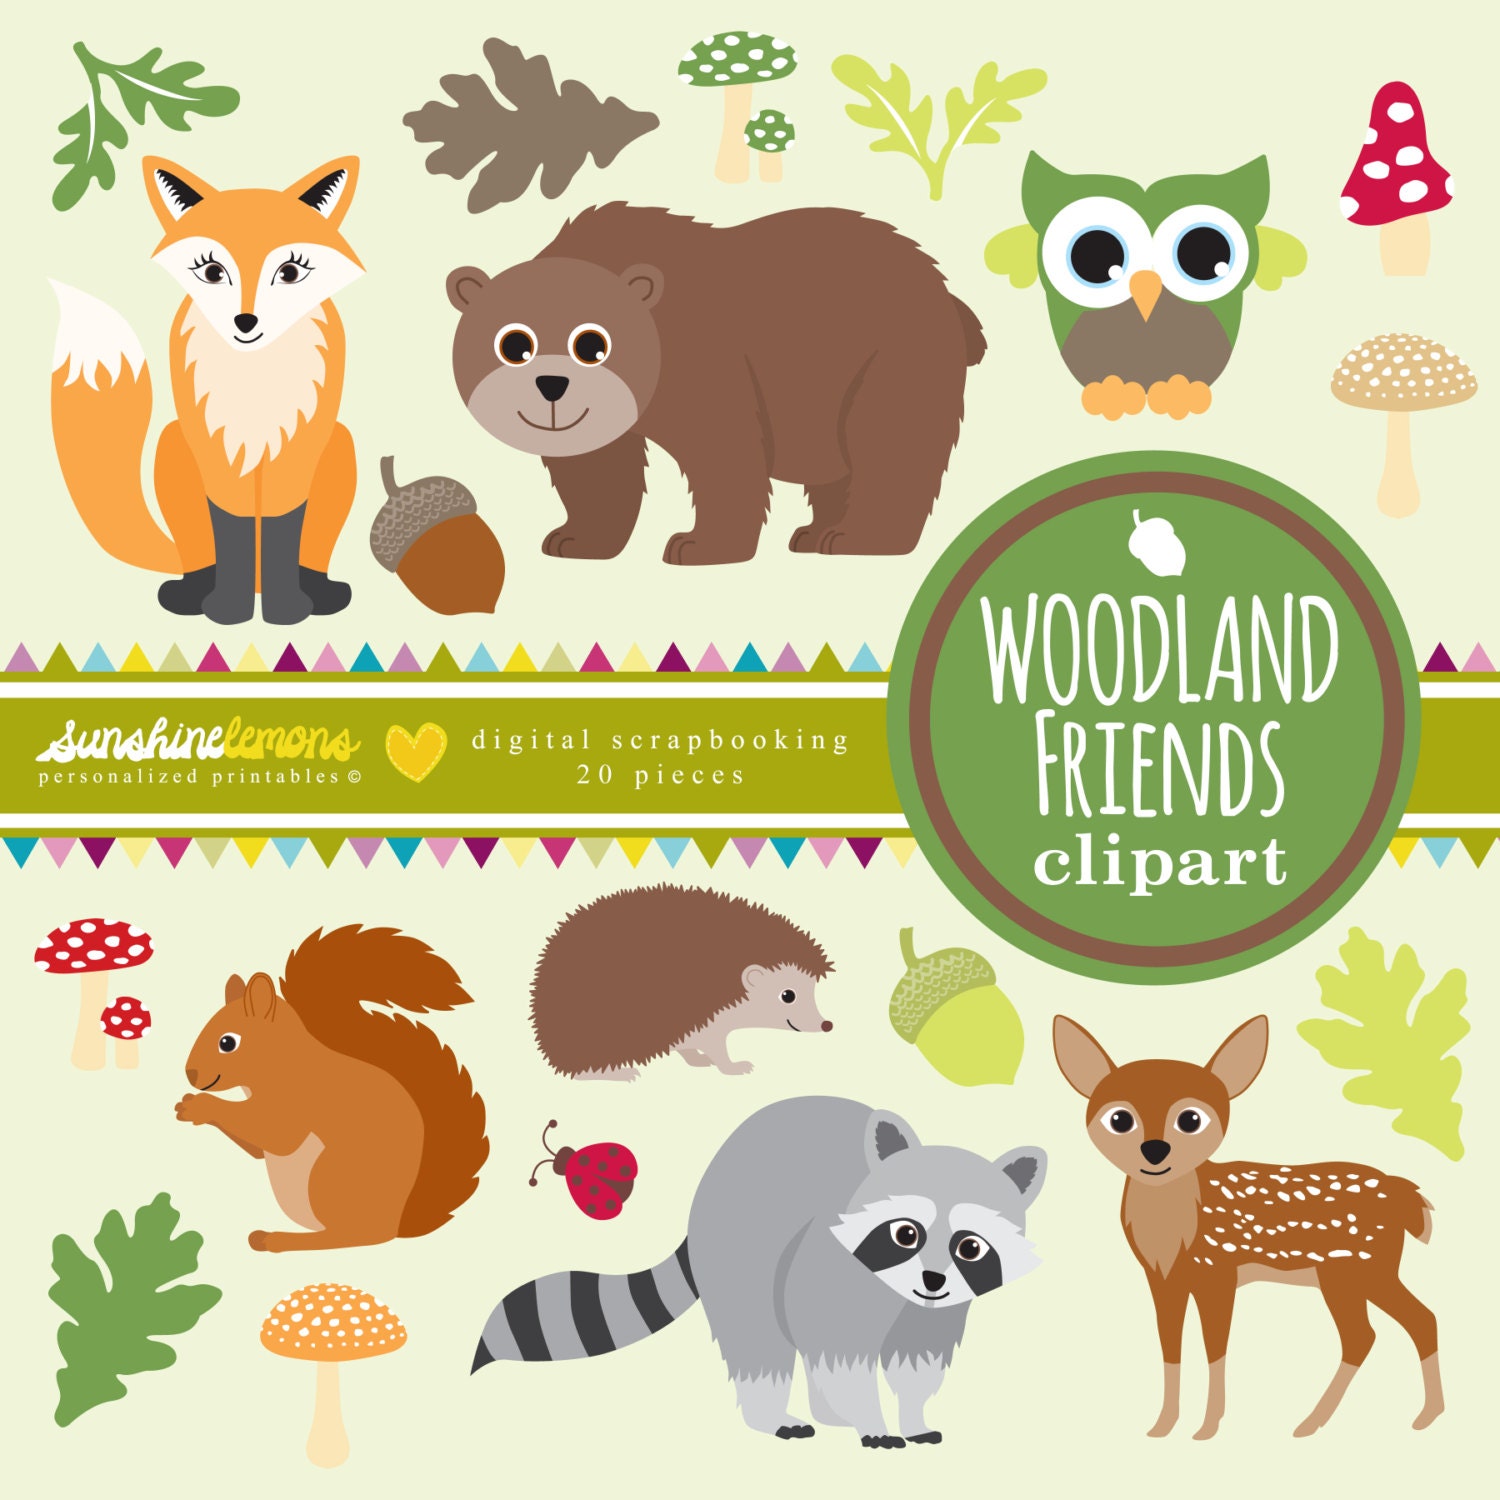 Download Woodland Friends Clipart Woodland Creatures Clipart